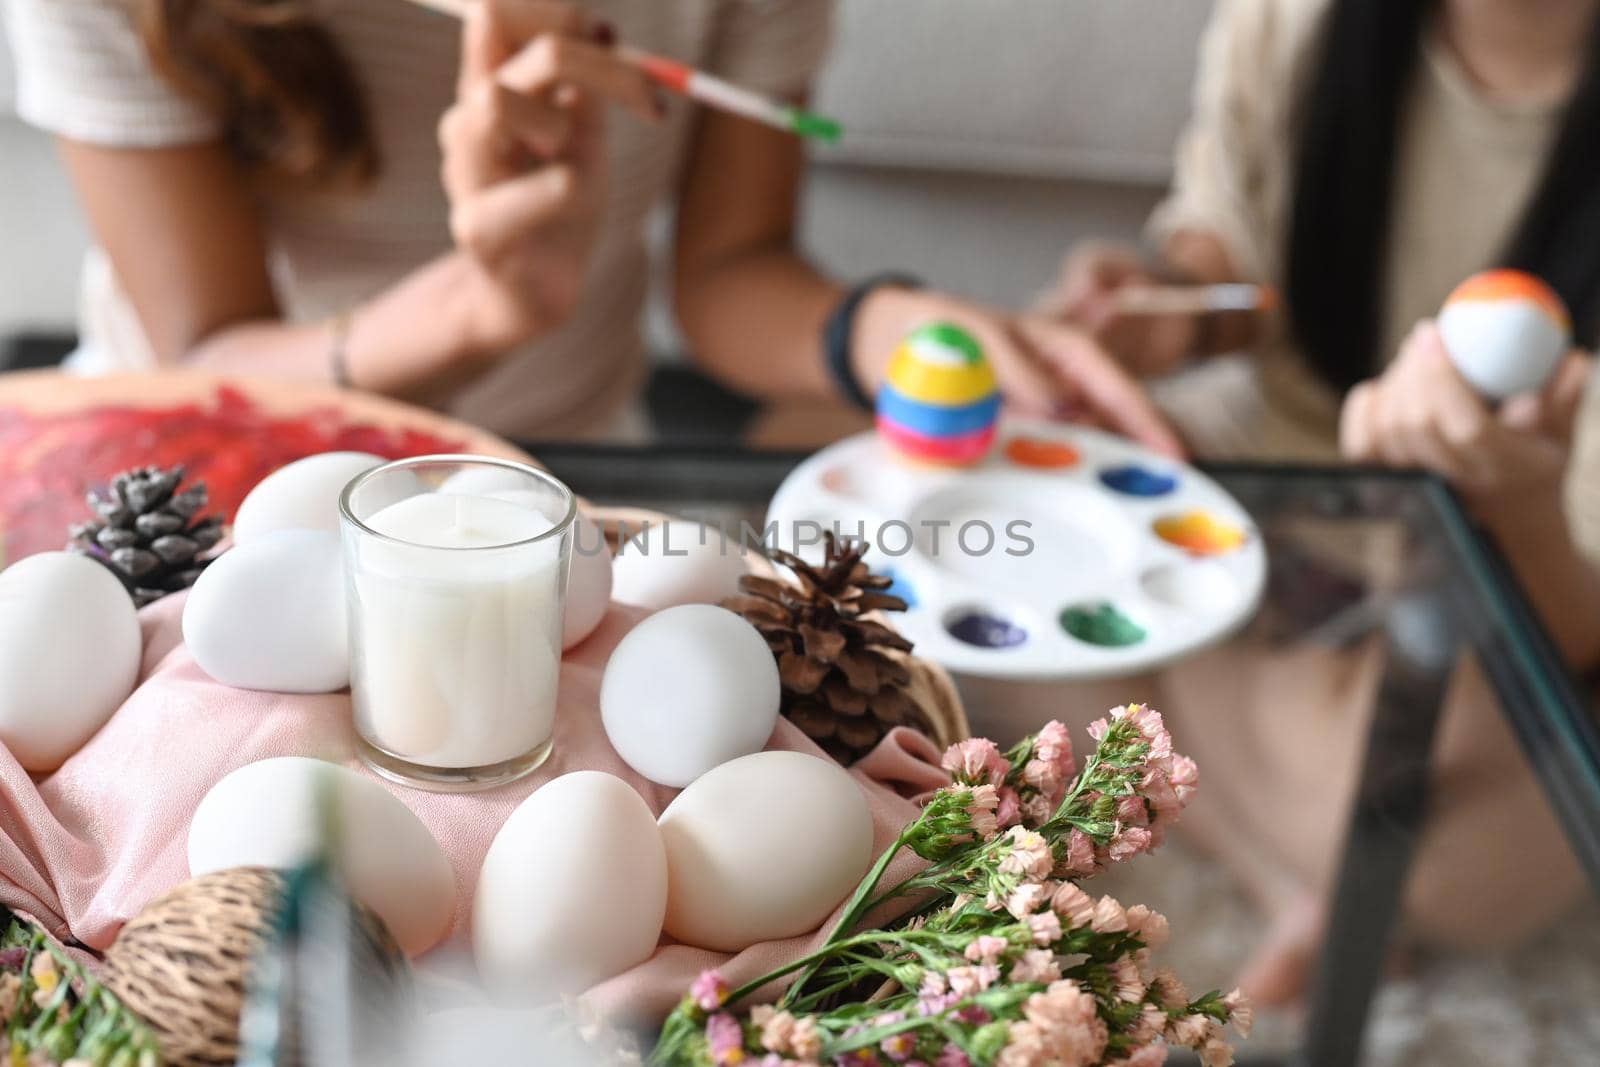 Wicker basket full of eggs and flowers on table in living room with mother and daughter painting Easter egg in background.